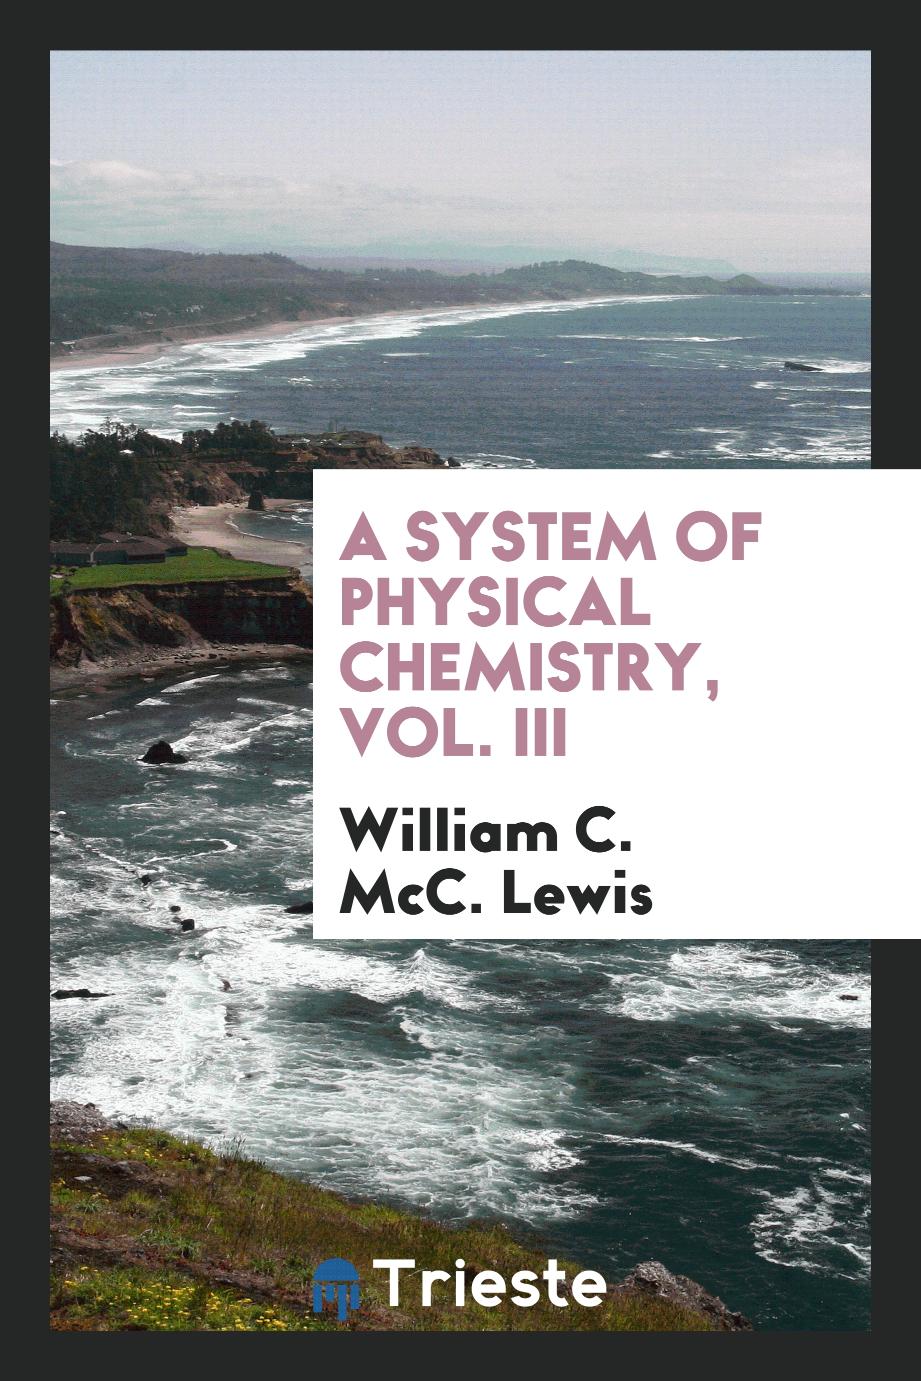 A System of Physical Chemistry, Vol. III